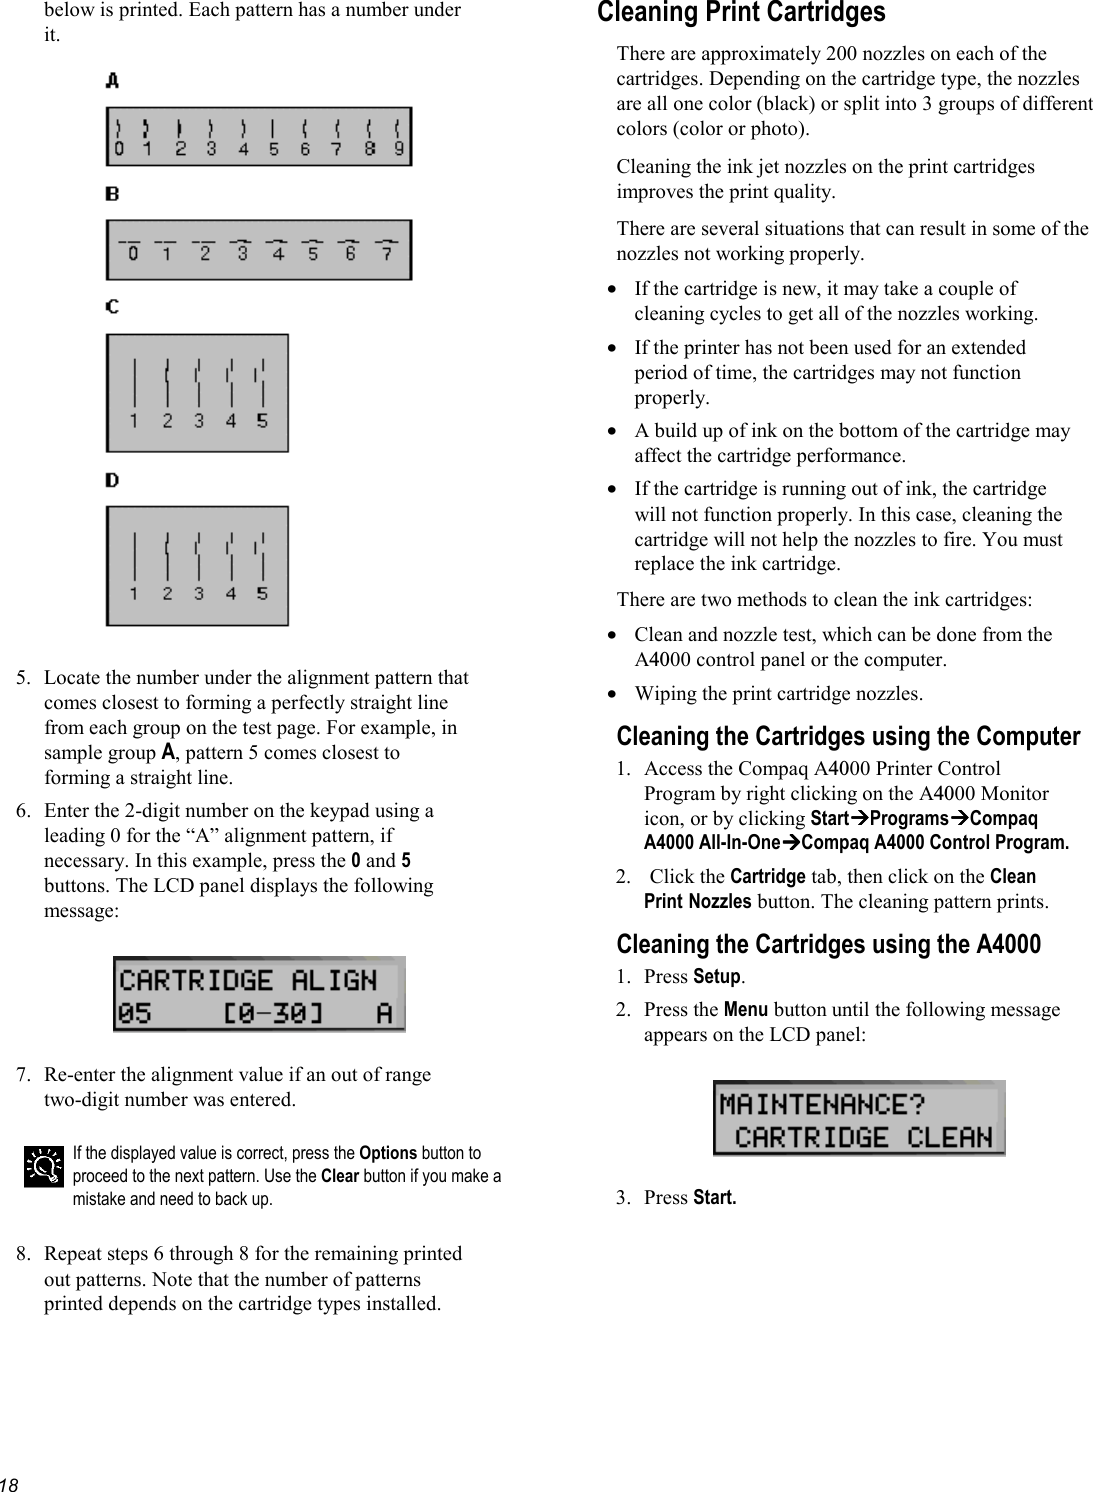   18below is printed. Each pattern has a number under it.    5.  Locate the number under the alignment pattern that comes closest to forming a perfectly straight line from each group on the test page. For example, in sample group A, pattern 5 comes closest to forming a straight line. 6.  Enter the 2-digit number on the keypad using a leading 0 for the “A” alignment pattern, if necessary. In this example, press the 0 and 5 buttons. The LCD panel displays the following message:    7.  Re-enter the alignment value if an out of range two-digit number was entered.   If the displayed value is correct, press the Options button to proceed to the next pattern. Use the Clear button if you make a mistake and need to back up.  8.  Repeat steps 6 through 8 for the remaining printed out patterns. Note that the number of patterns printed depends on the cartridge types installed. Cleaning Print Cartridges There are approximately 200 nozzles on each of the cartridges. Depending on the cartridge type, the nozzles are all one color (black) or split into 3 groups of different colors (color or photo). Cleaning the ink jet nozzles on the print cartridges improves the print quality. There are several situations that can result in some of the nozzles not working properly.  •  If the cartridge is new, it may take a couple of cleaning cycles to get all of the nozzles working. •  If the printer has not been used for an extended period of time, the cartridges may not function properly. •  A build up of ink on the bottom of the cartridge may affect the cartridge performance. •  If the cartridge is running out of ink, the cartridge will not function properly. In this case, cleaning the cartridge will not help the nozzles to fire. You must replace the ink cartridge. There are two methods to clean the ink cartridges: •  Clean and nozzle test, which can be done from the A4000 control panel or the computer. •  Wiping the print cartridge nozzles. Cleaning the Cartridges using the Computer 1. Access the Compaq A4000 Printer Control Program by right clicking on the A4000 Monitor icon, or by clicking StartProgramsCompaq A4000 All-In-OneCompaq A4000 Control Program. 2.   Click the Cartridge tab, then click on the Clean Print Nozzles button. The cleaning pattern prints. Cleaning the Cartridges using the A4000 1. Press Setup. 2. Press the Menu button until the following message appears on the LCD panel:    3. Press Start. 